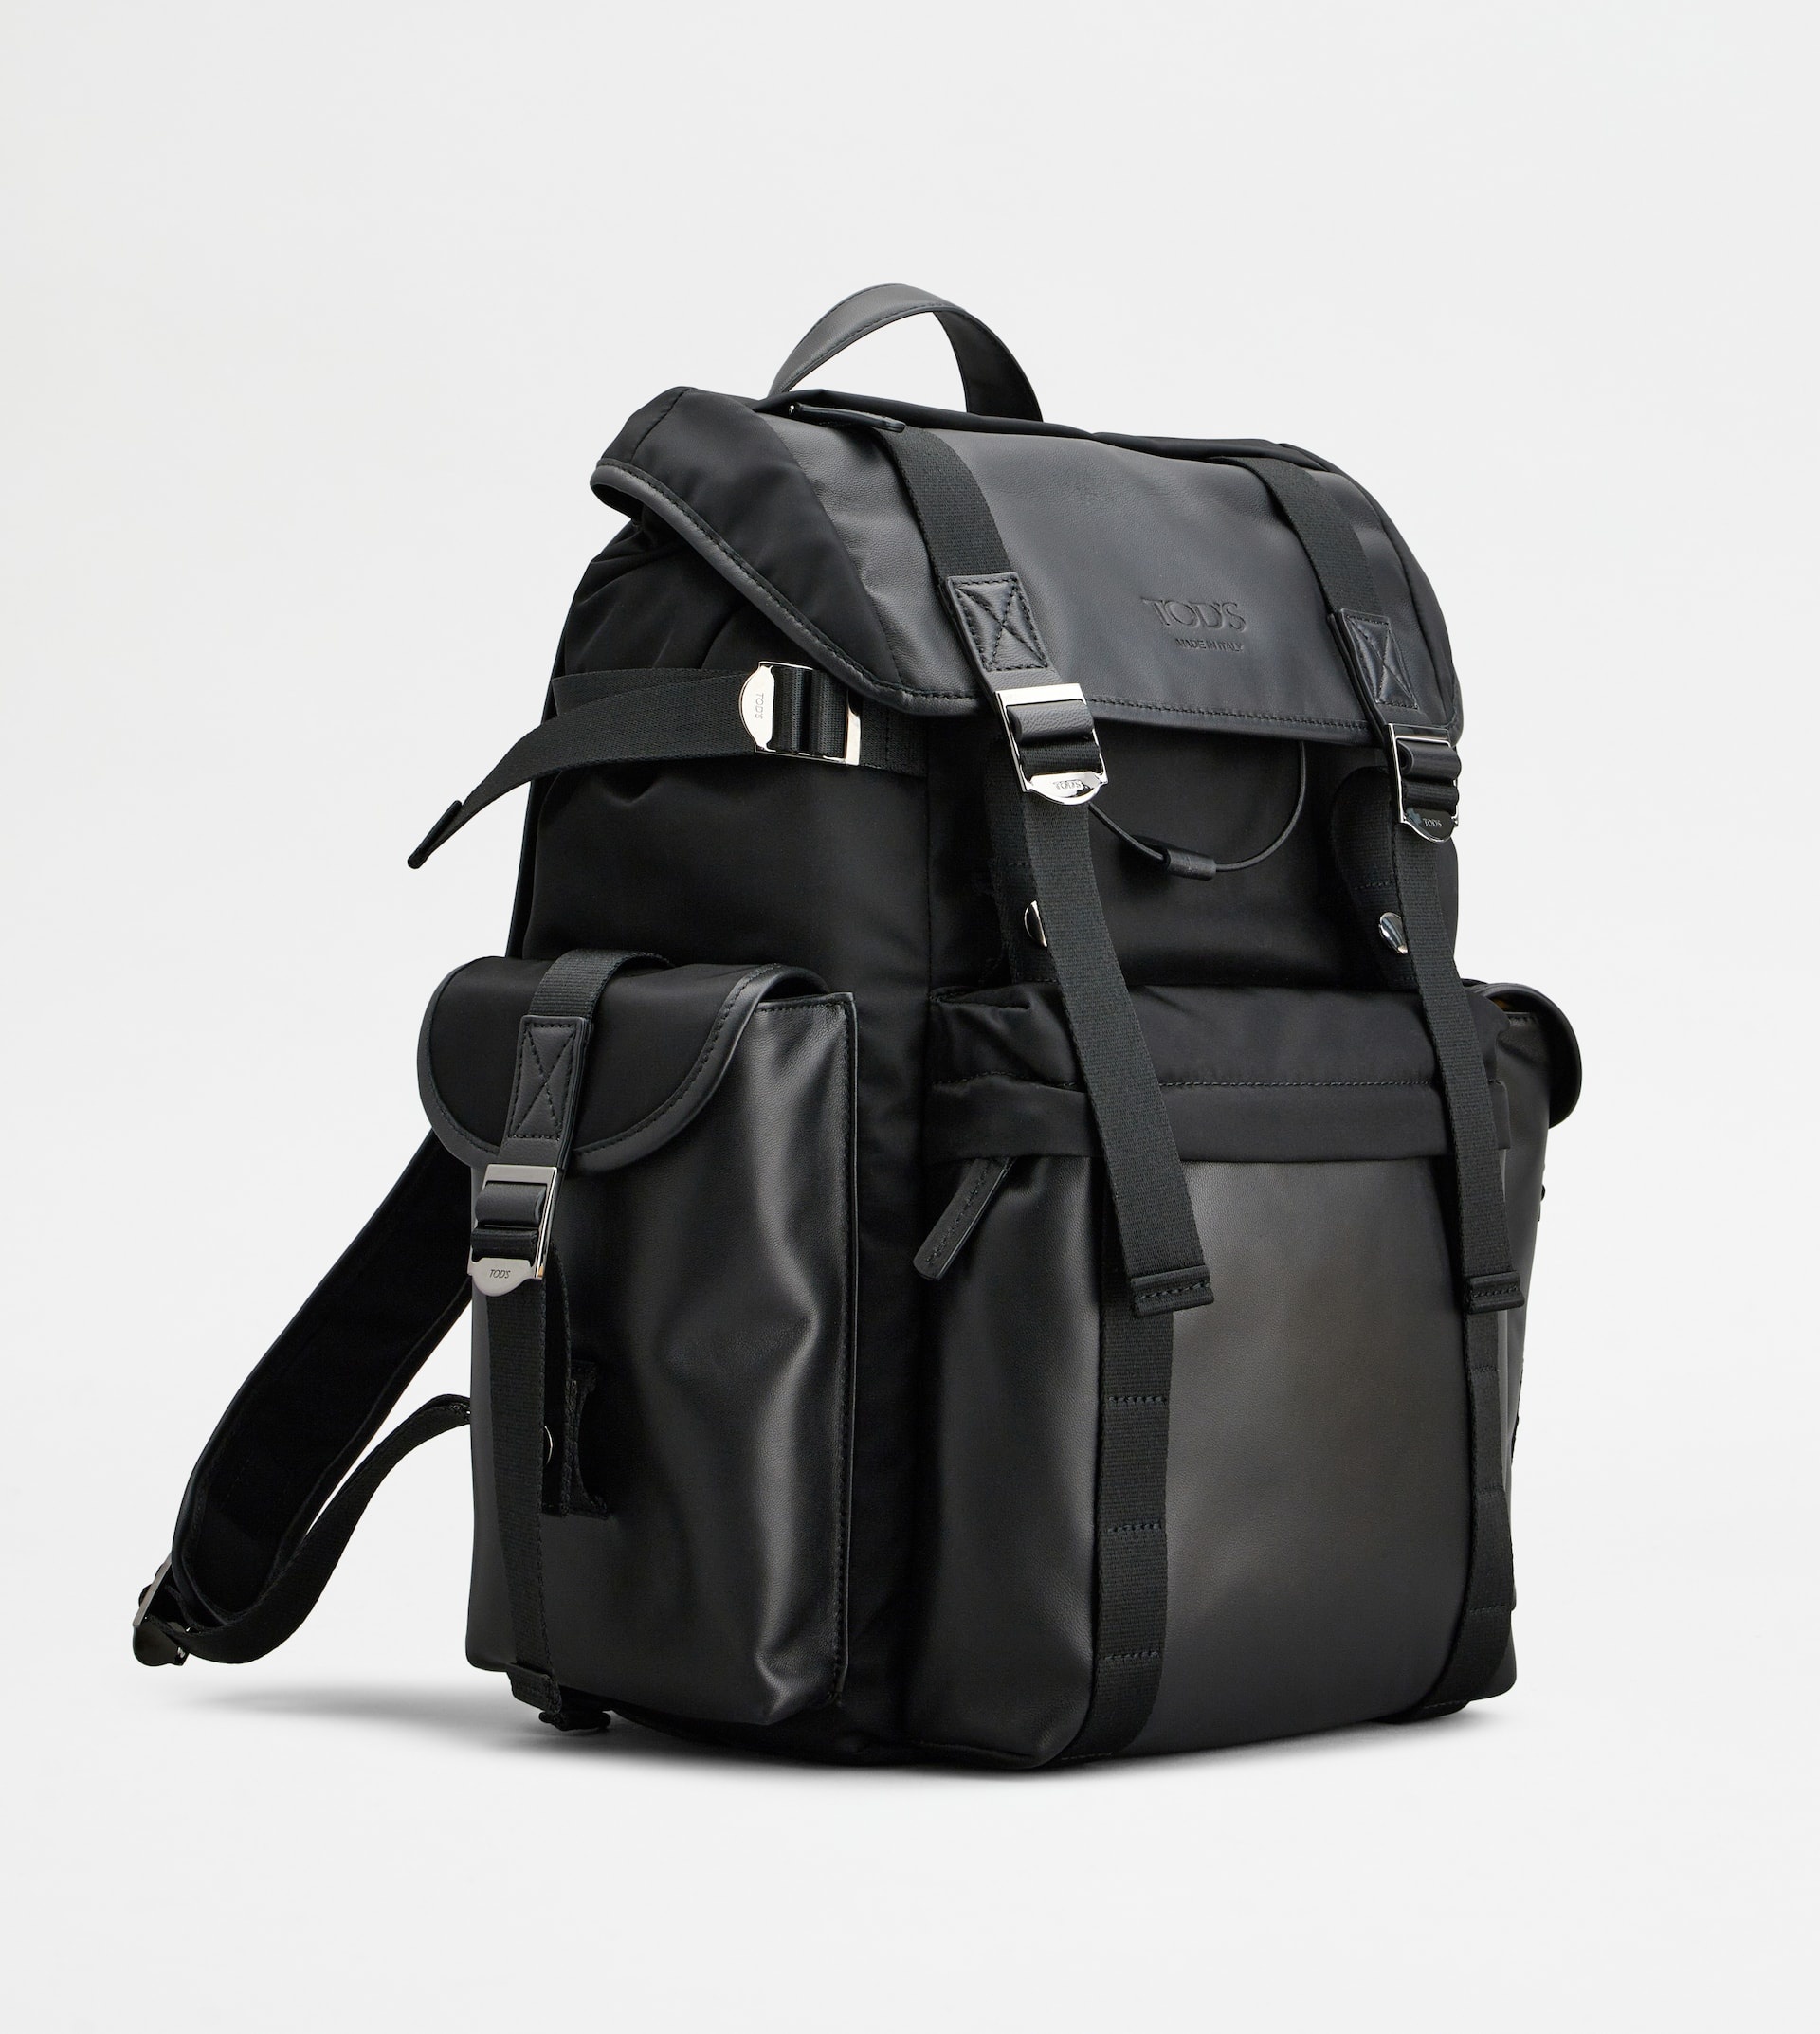 BACKPACK IN FABRIC AND LEATHER MEDIUM - BLACK - 4